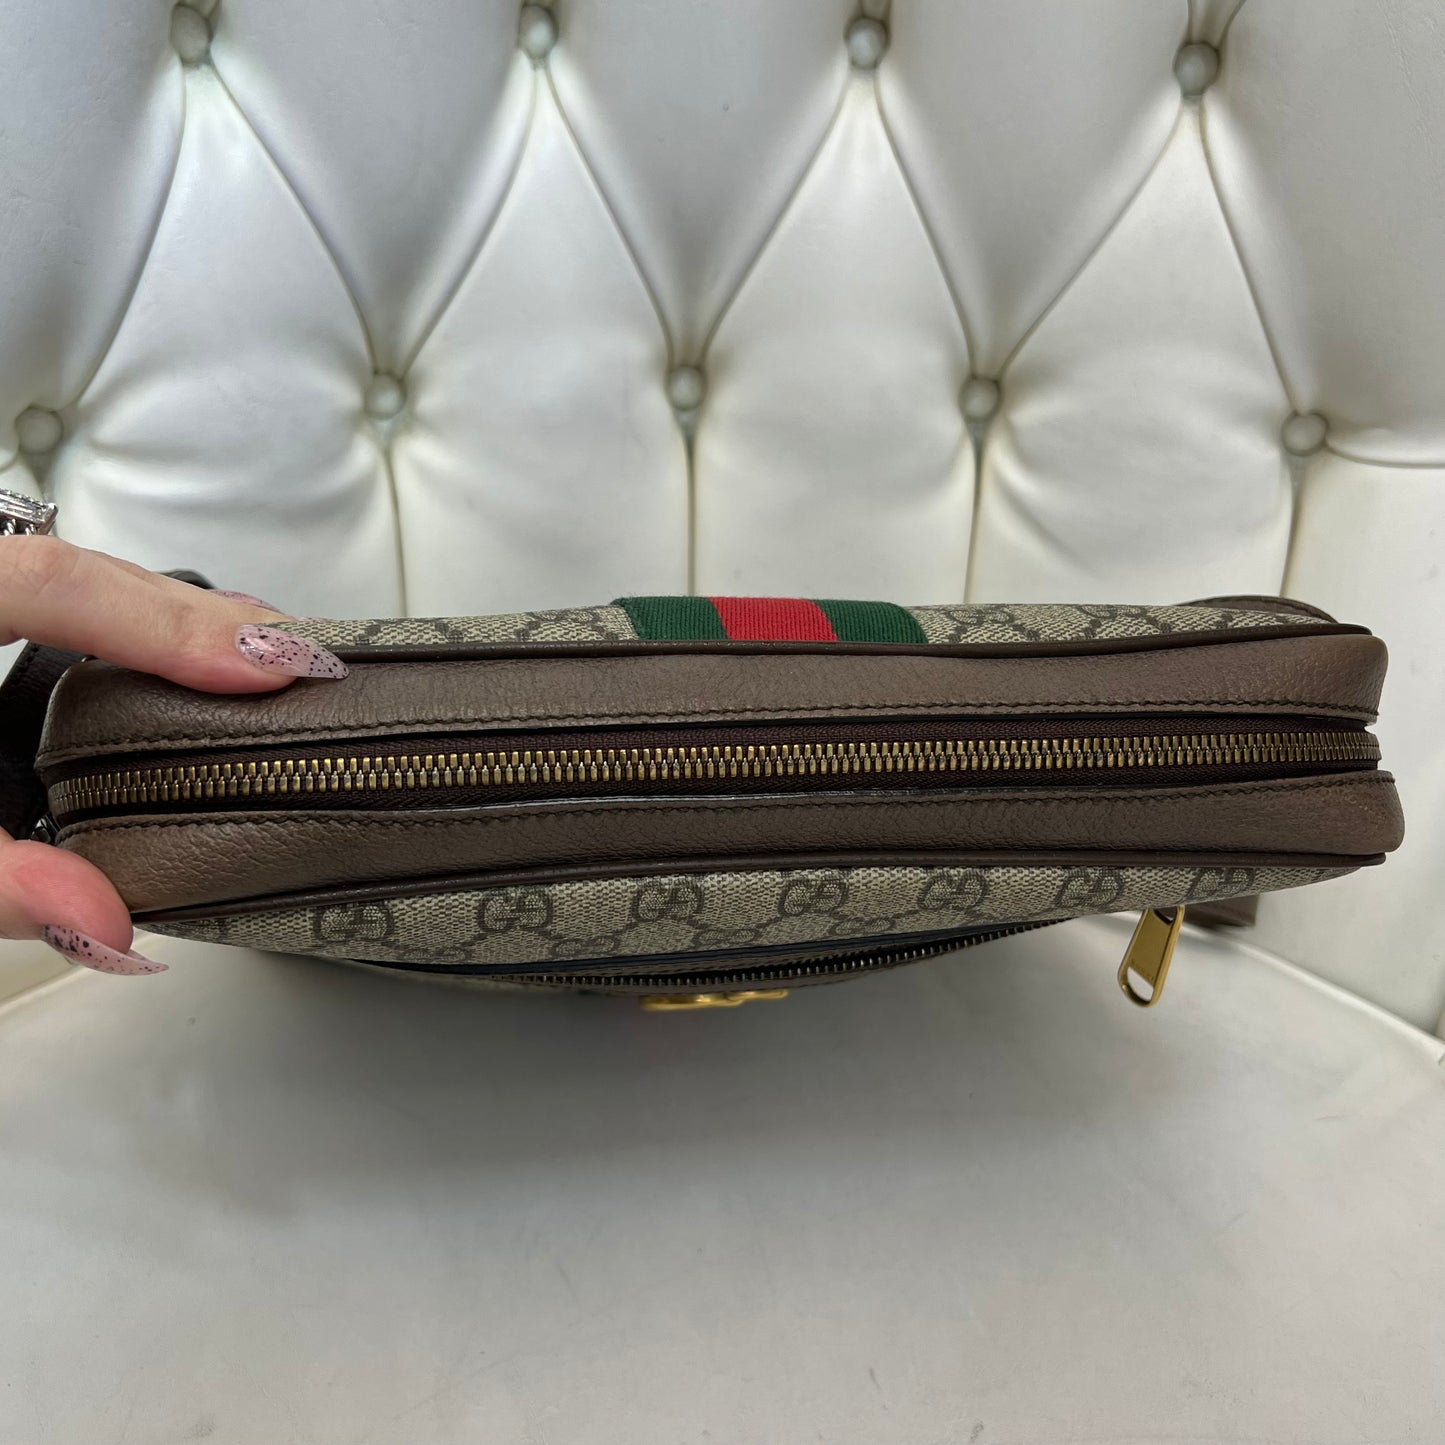 Gucci Ophidia GG Messenger, Large